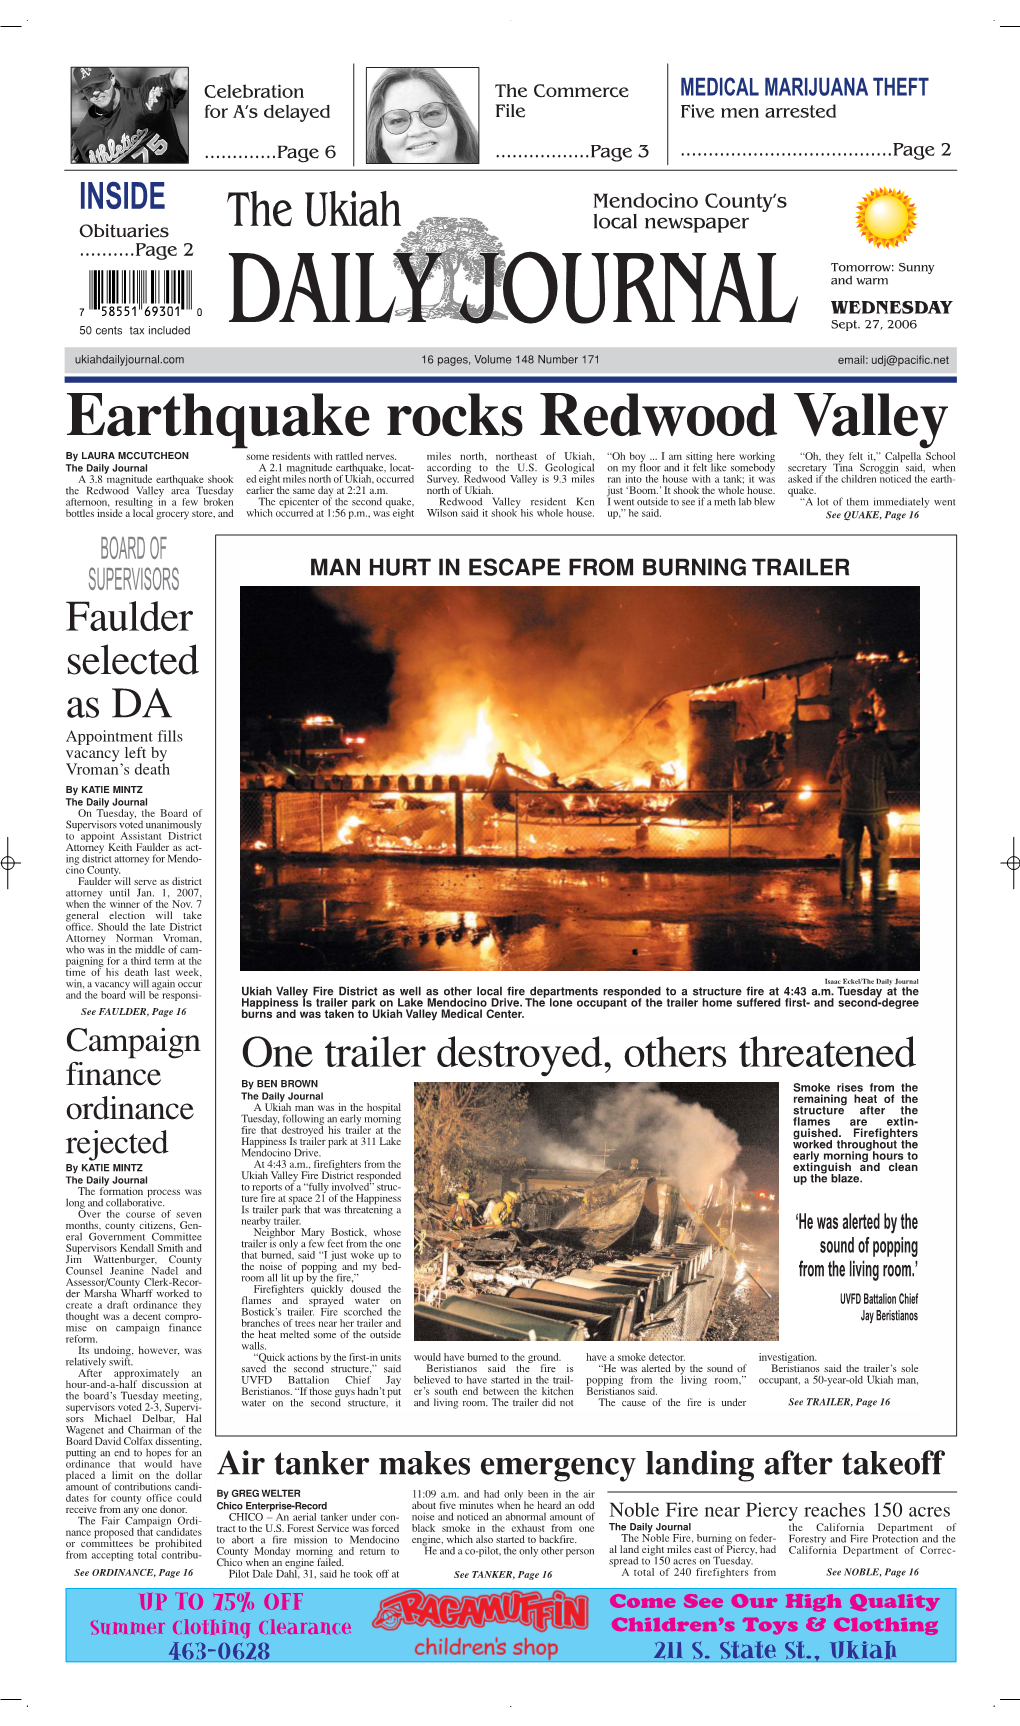 Earthquake Rocks Redwood Valley by LAURA MCCUTCHEON Some Residents with Rattled Nerves